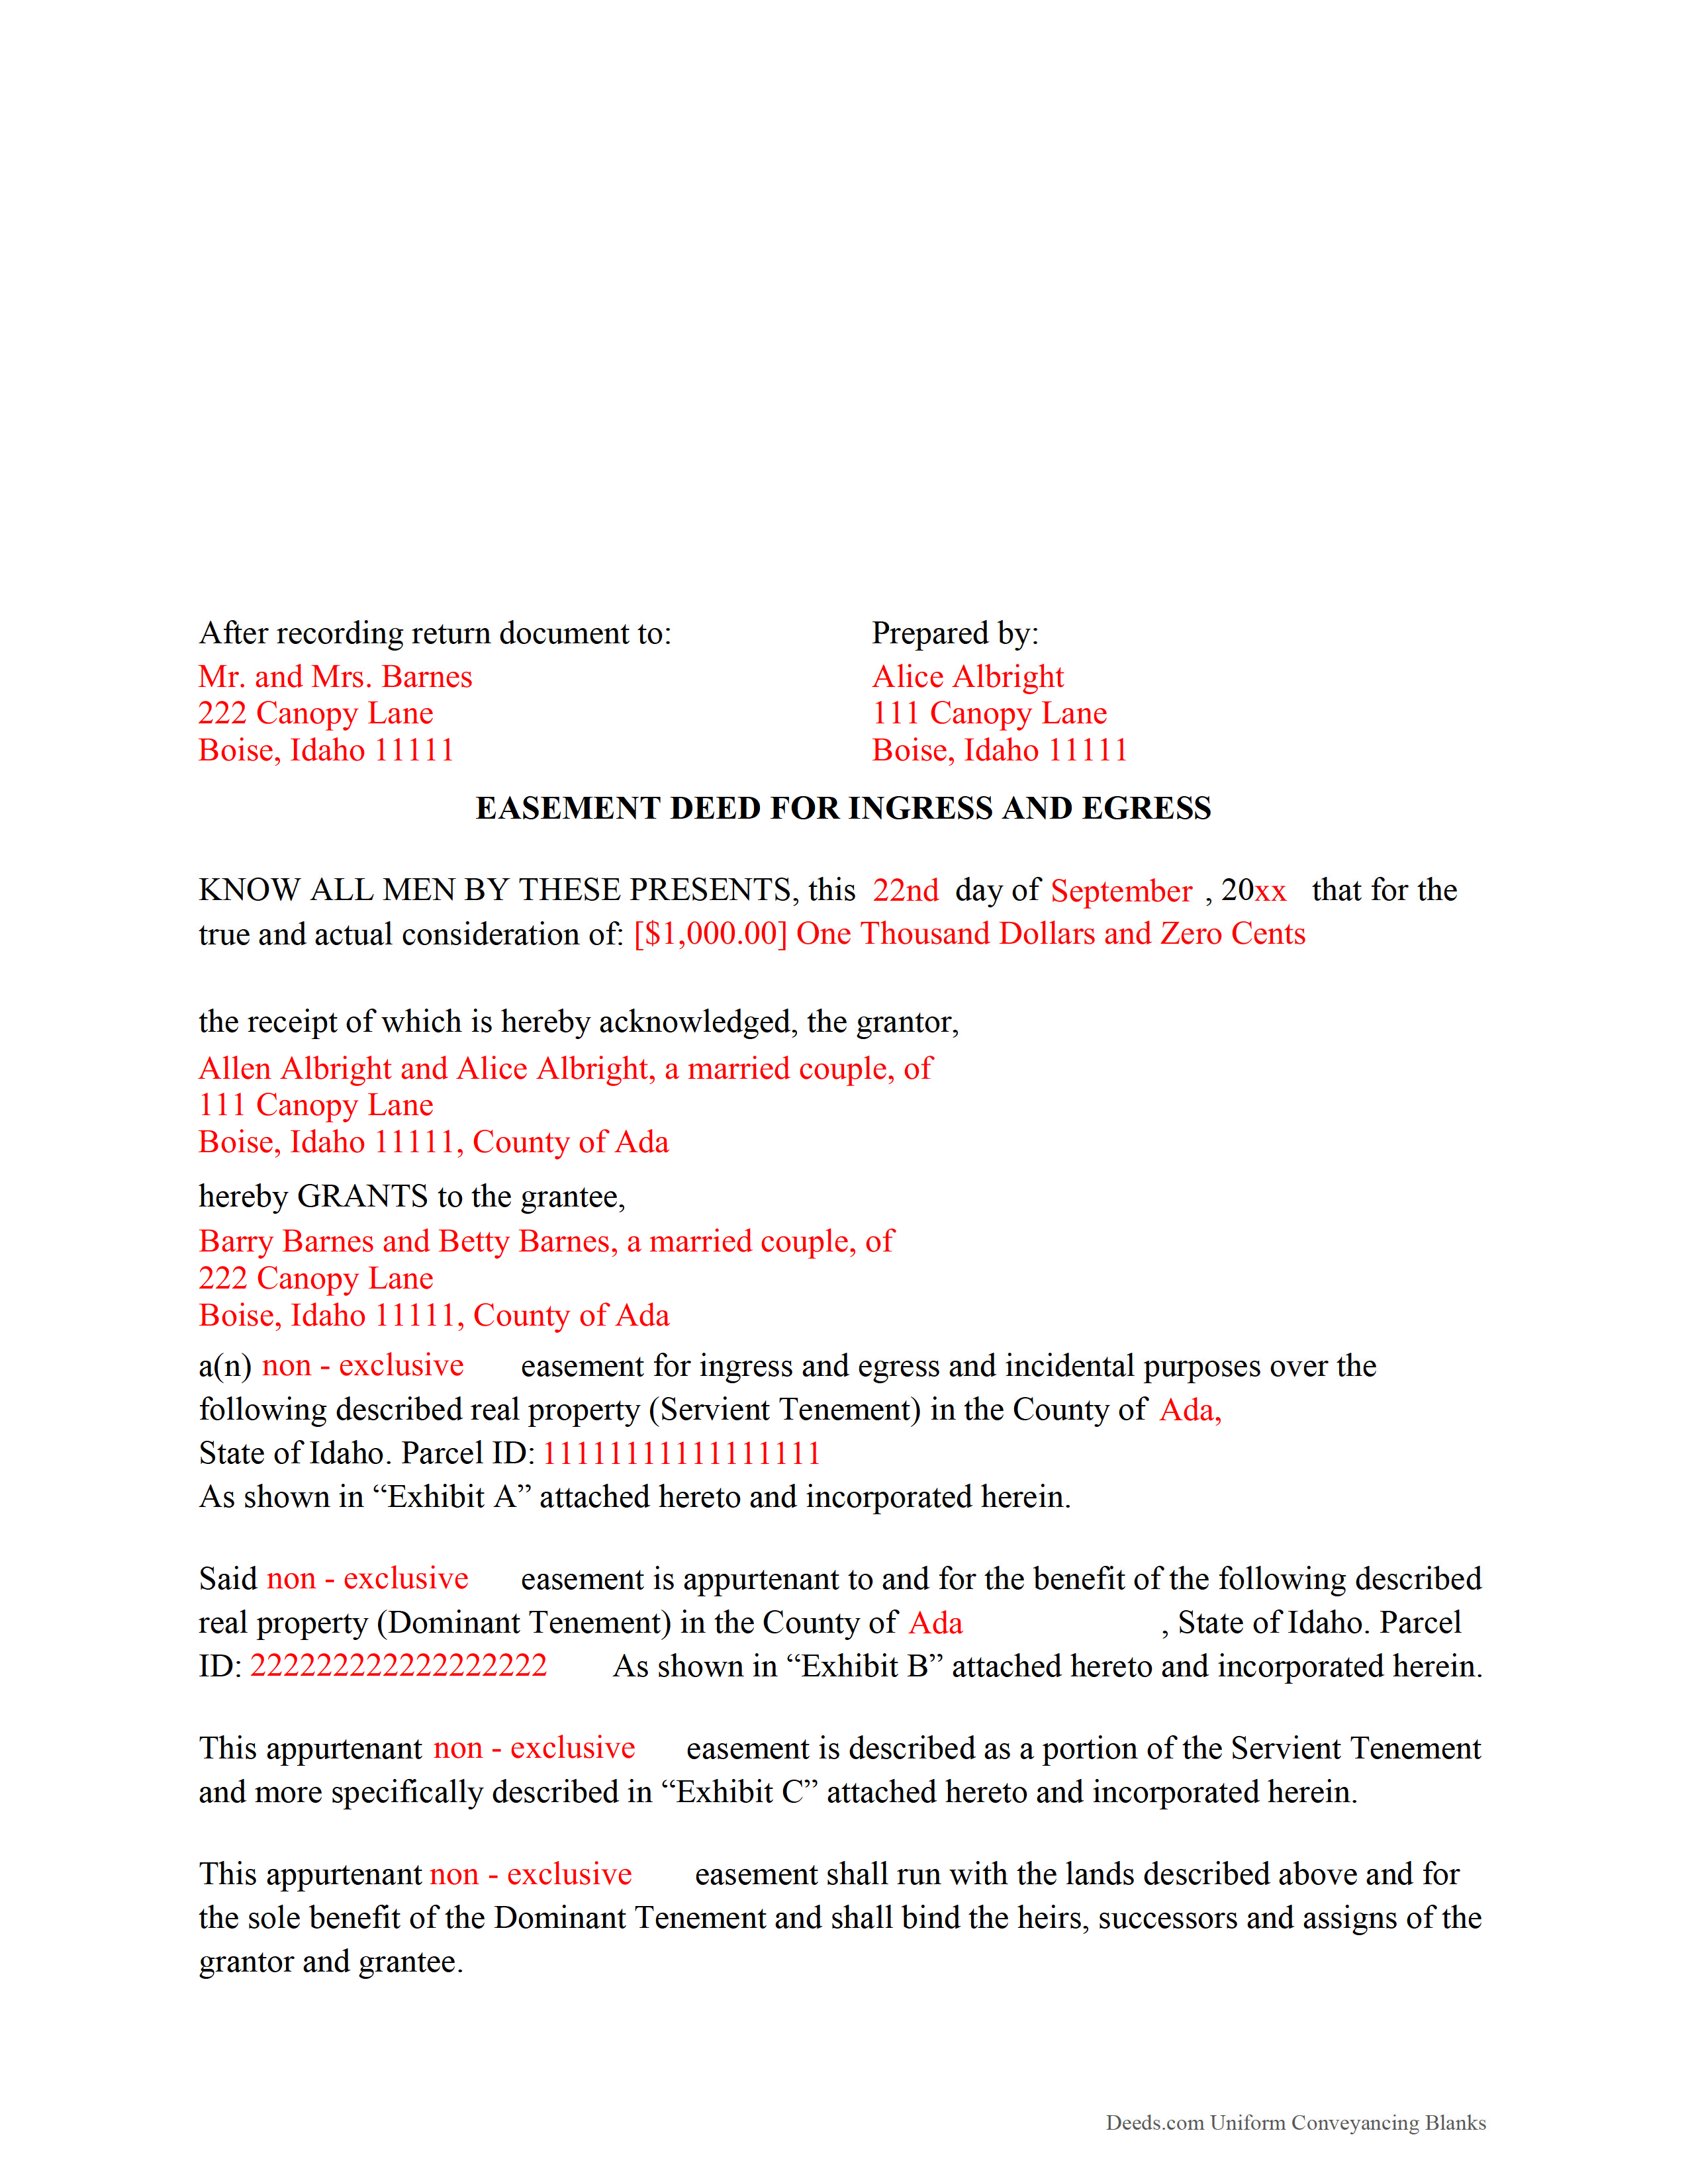 Completed Example of the Easement Deed Document